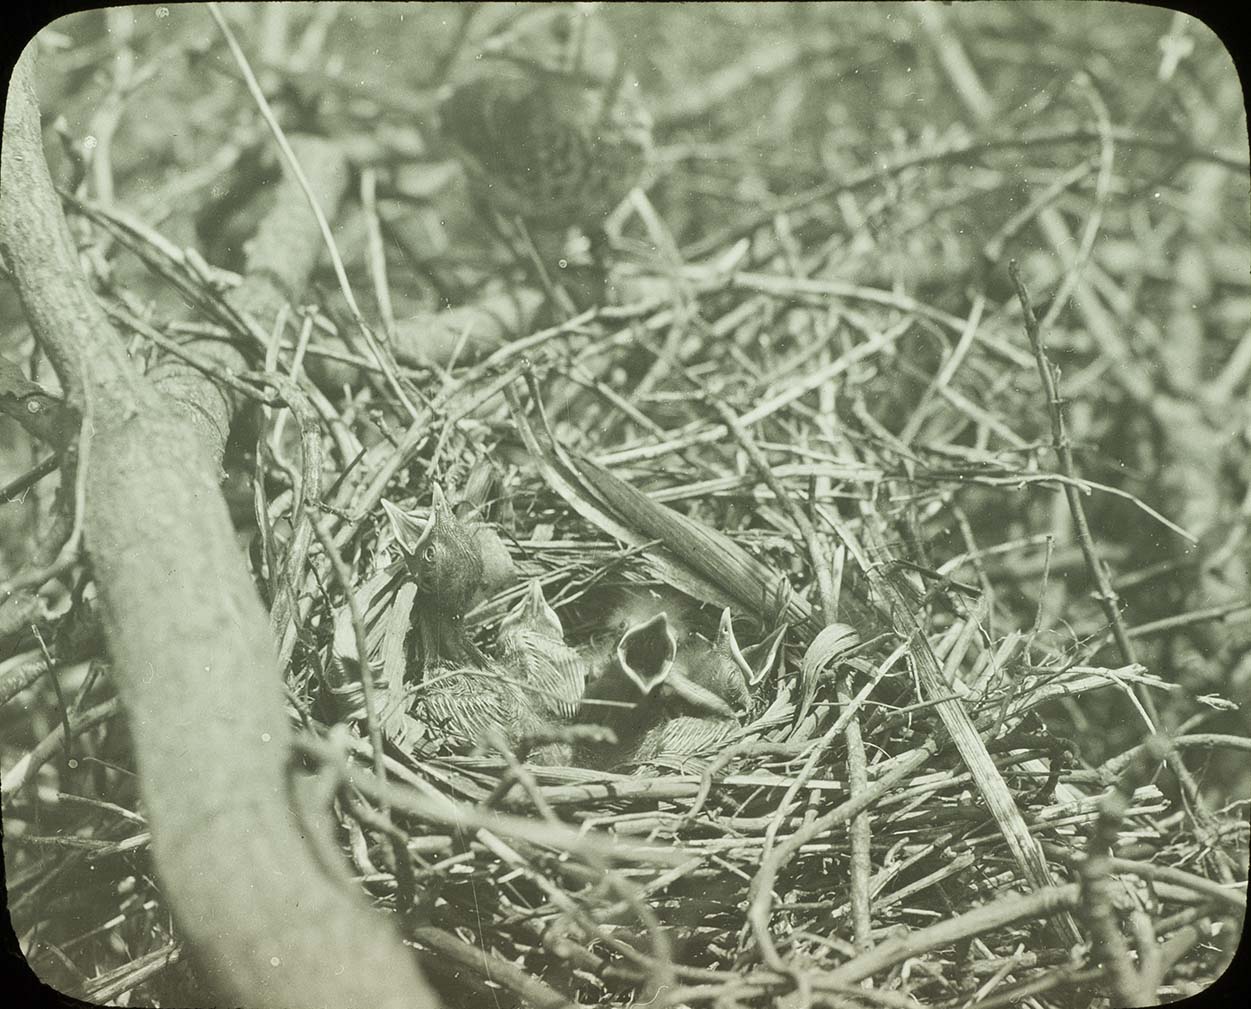 Lantern slide and photograph of four young Brown Thrashers in a nest